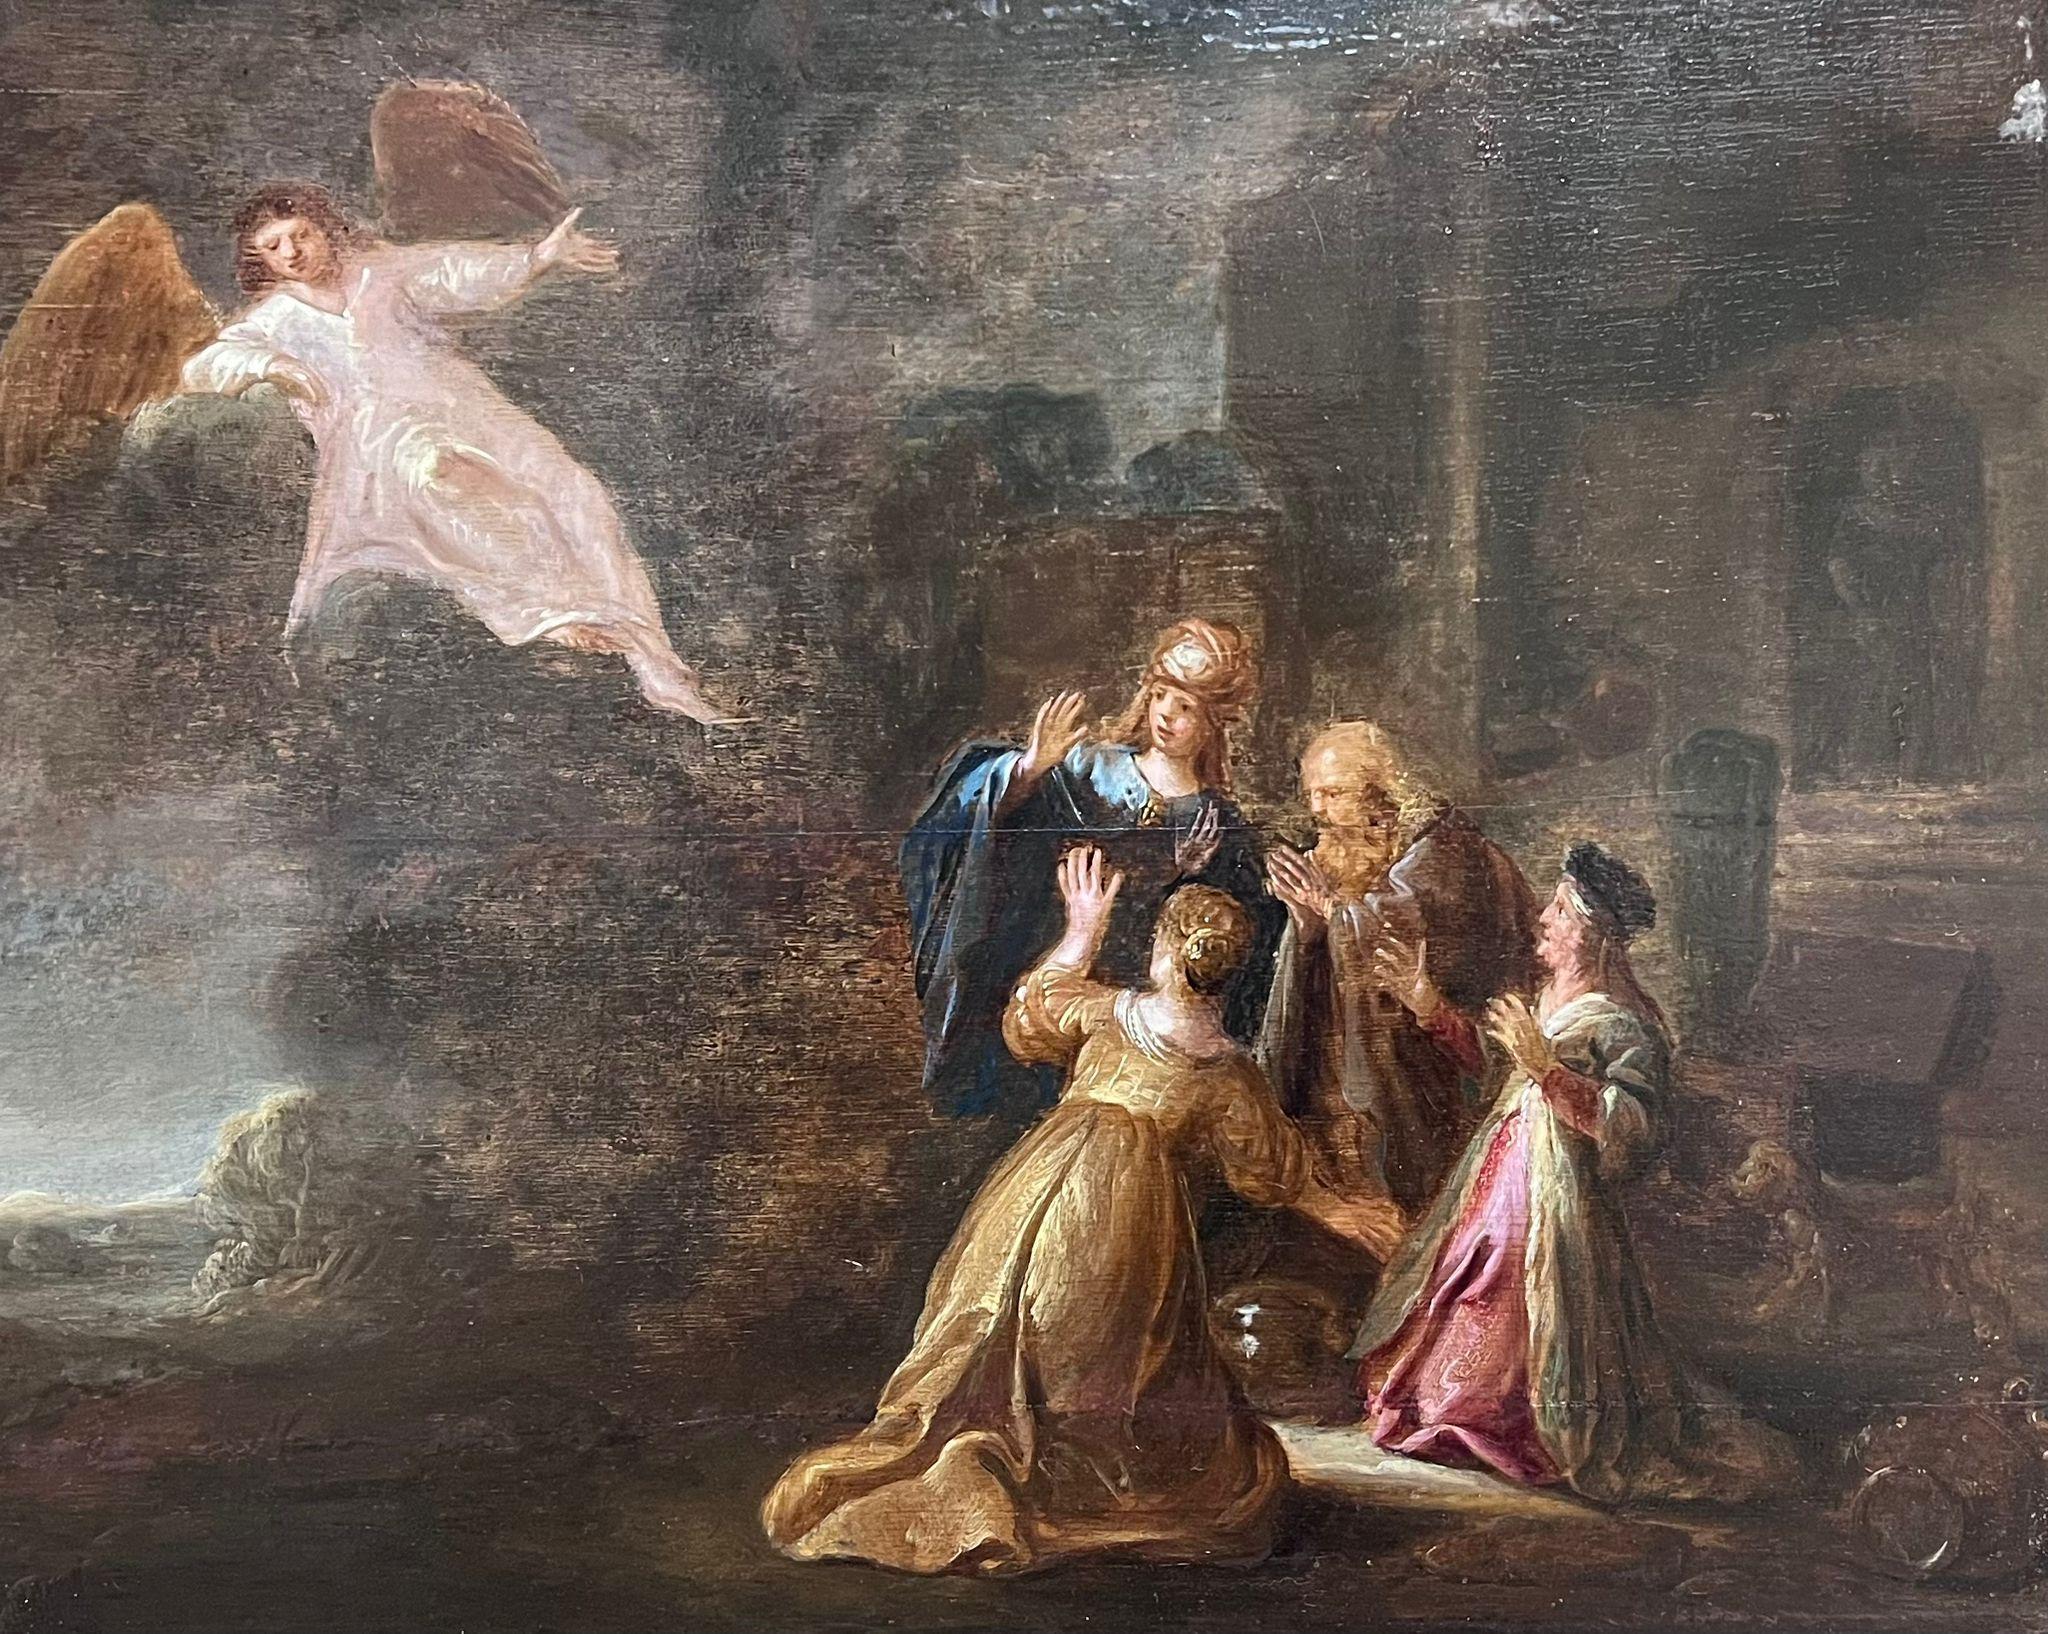 Rembrandt van Rijn Figurative Painting - Fine 17th Century Dutch Old Master Oil on Panel Angelic Visitation to Figures